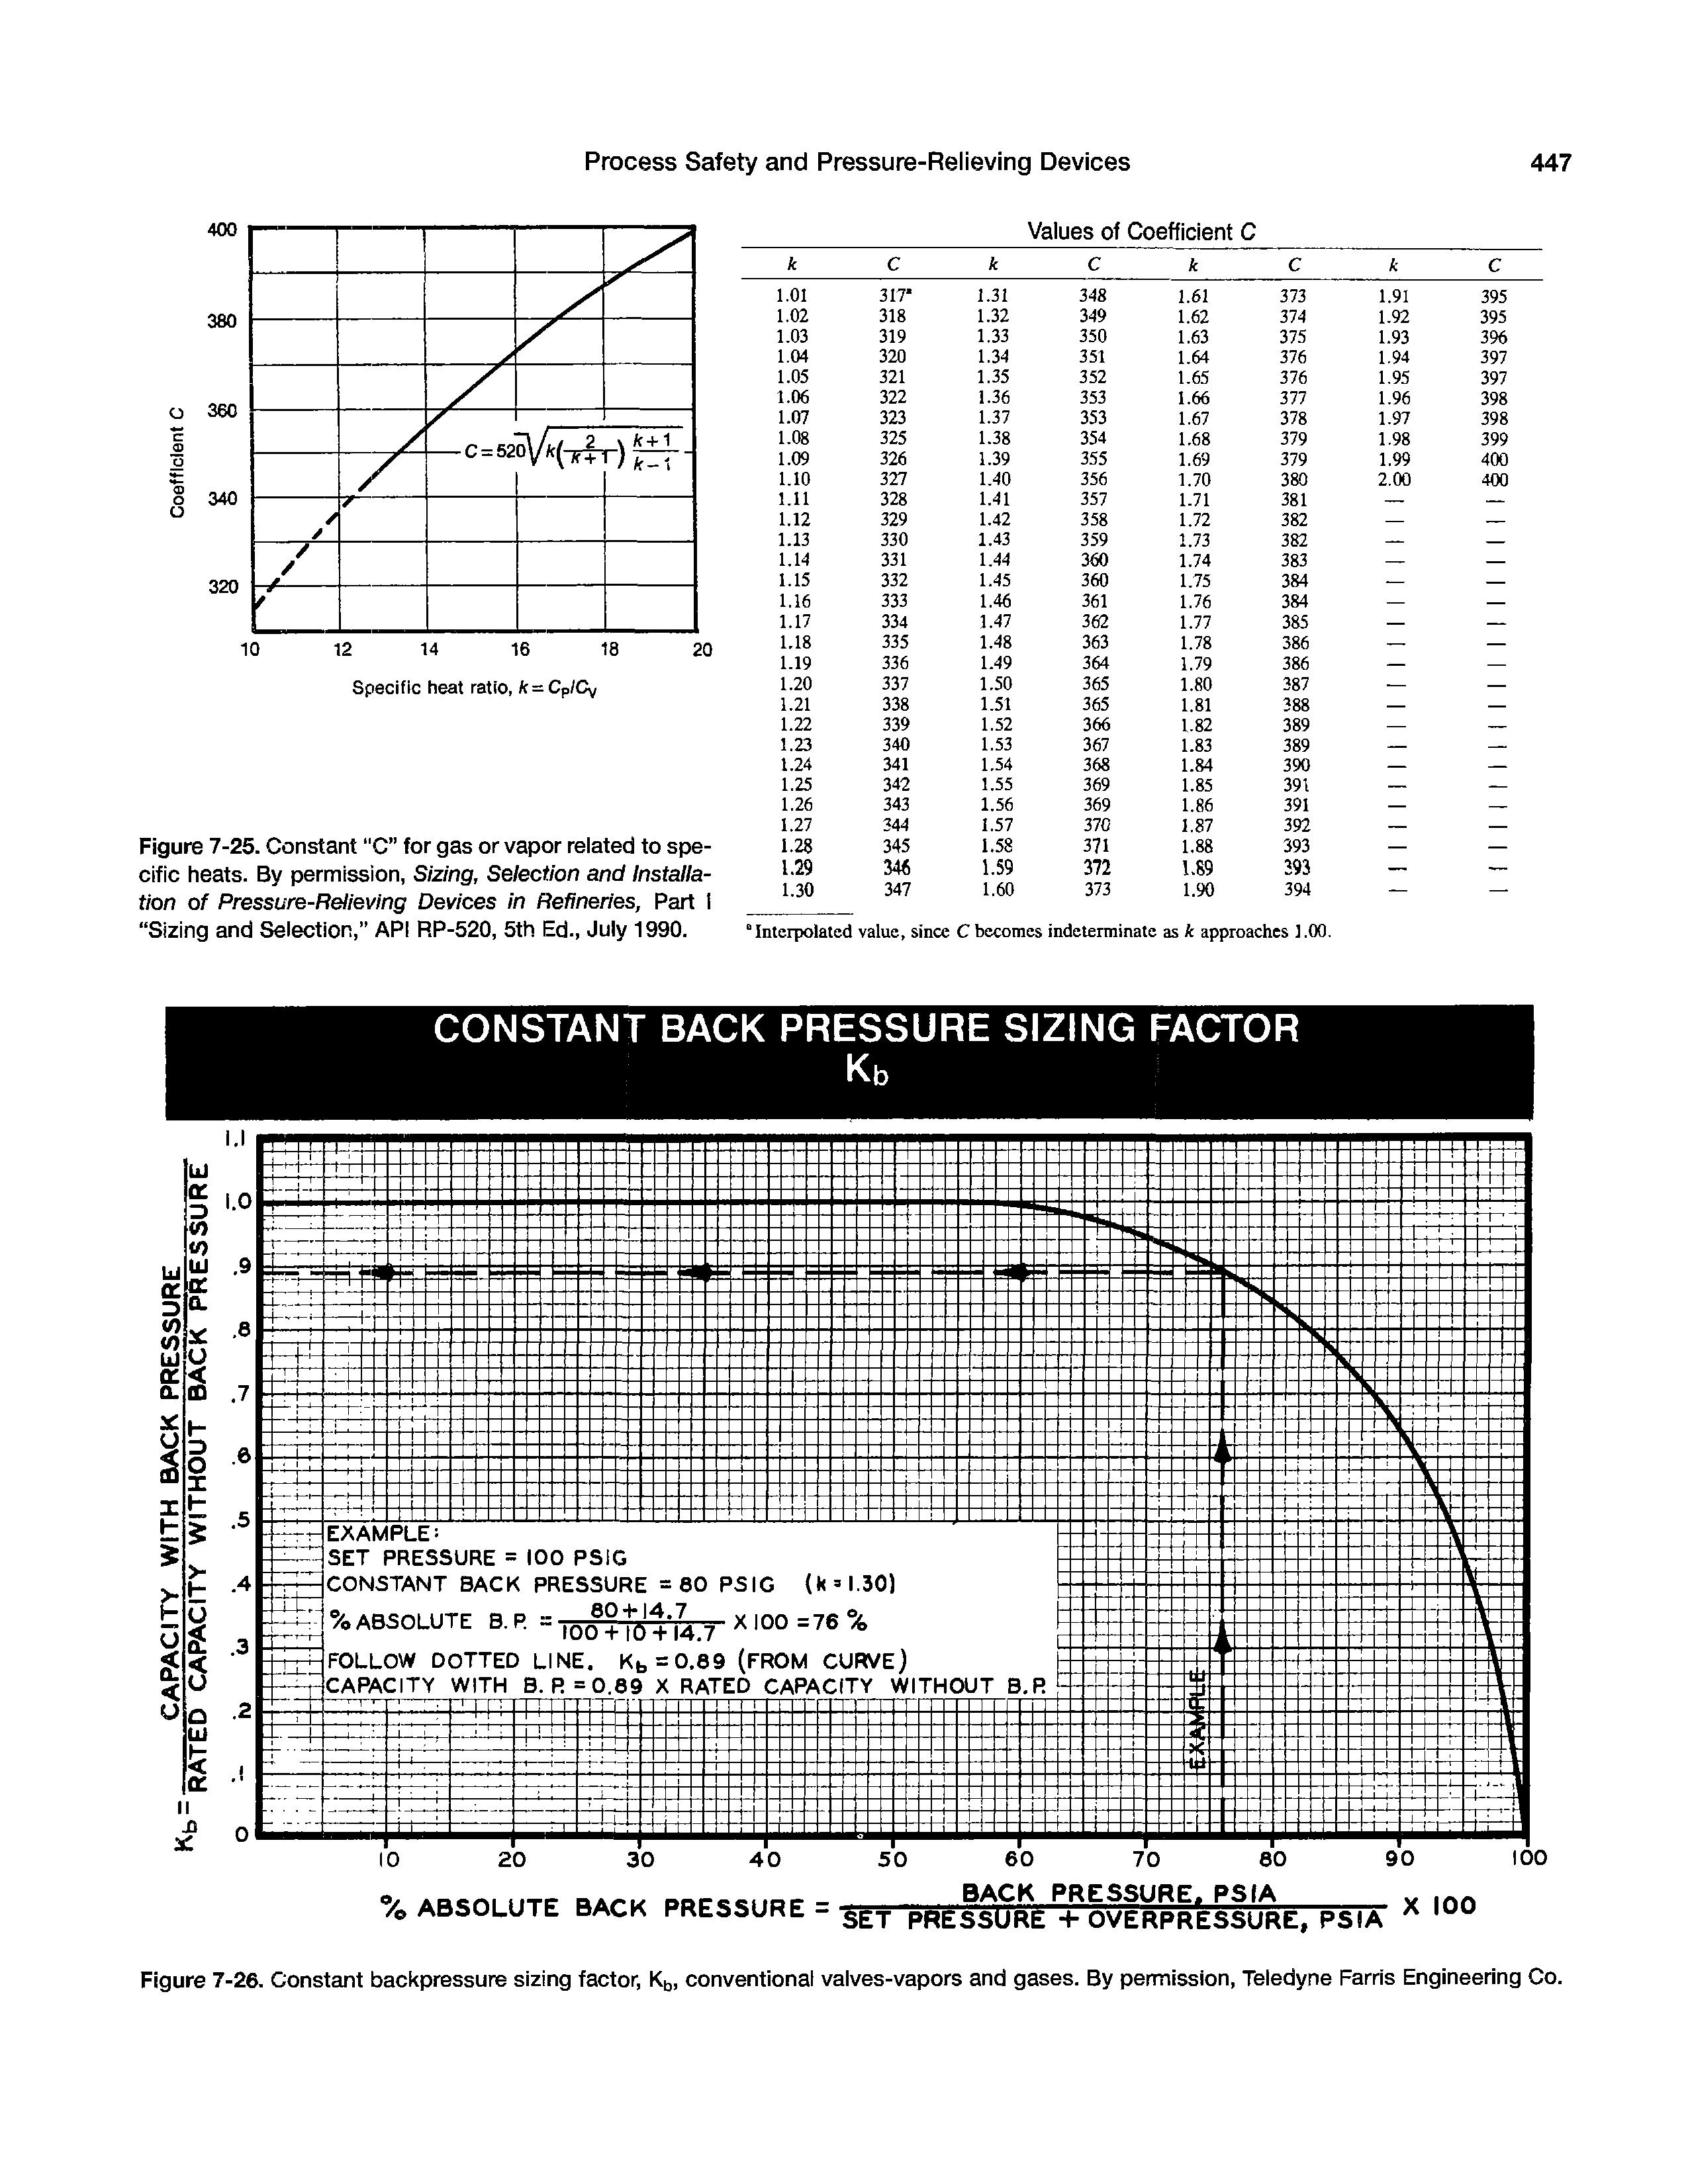 Figure 7-25. Constant "C for gas or vapor related to specific heats. By permission, Sizing, Selection and Installation of Pressure-Relieving Devices in Refineries, Part I Sizing and Selection, API P.P-520, 5th Ed., July 1990.